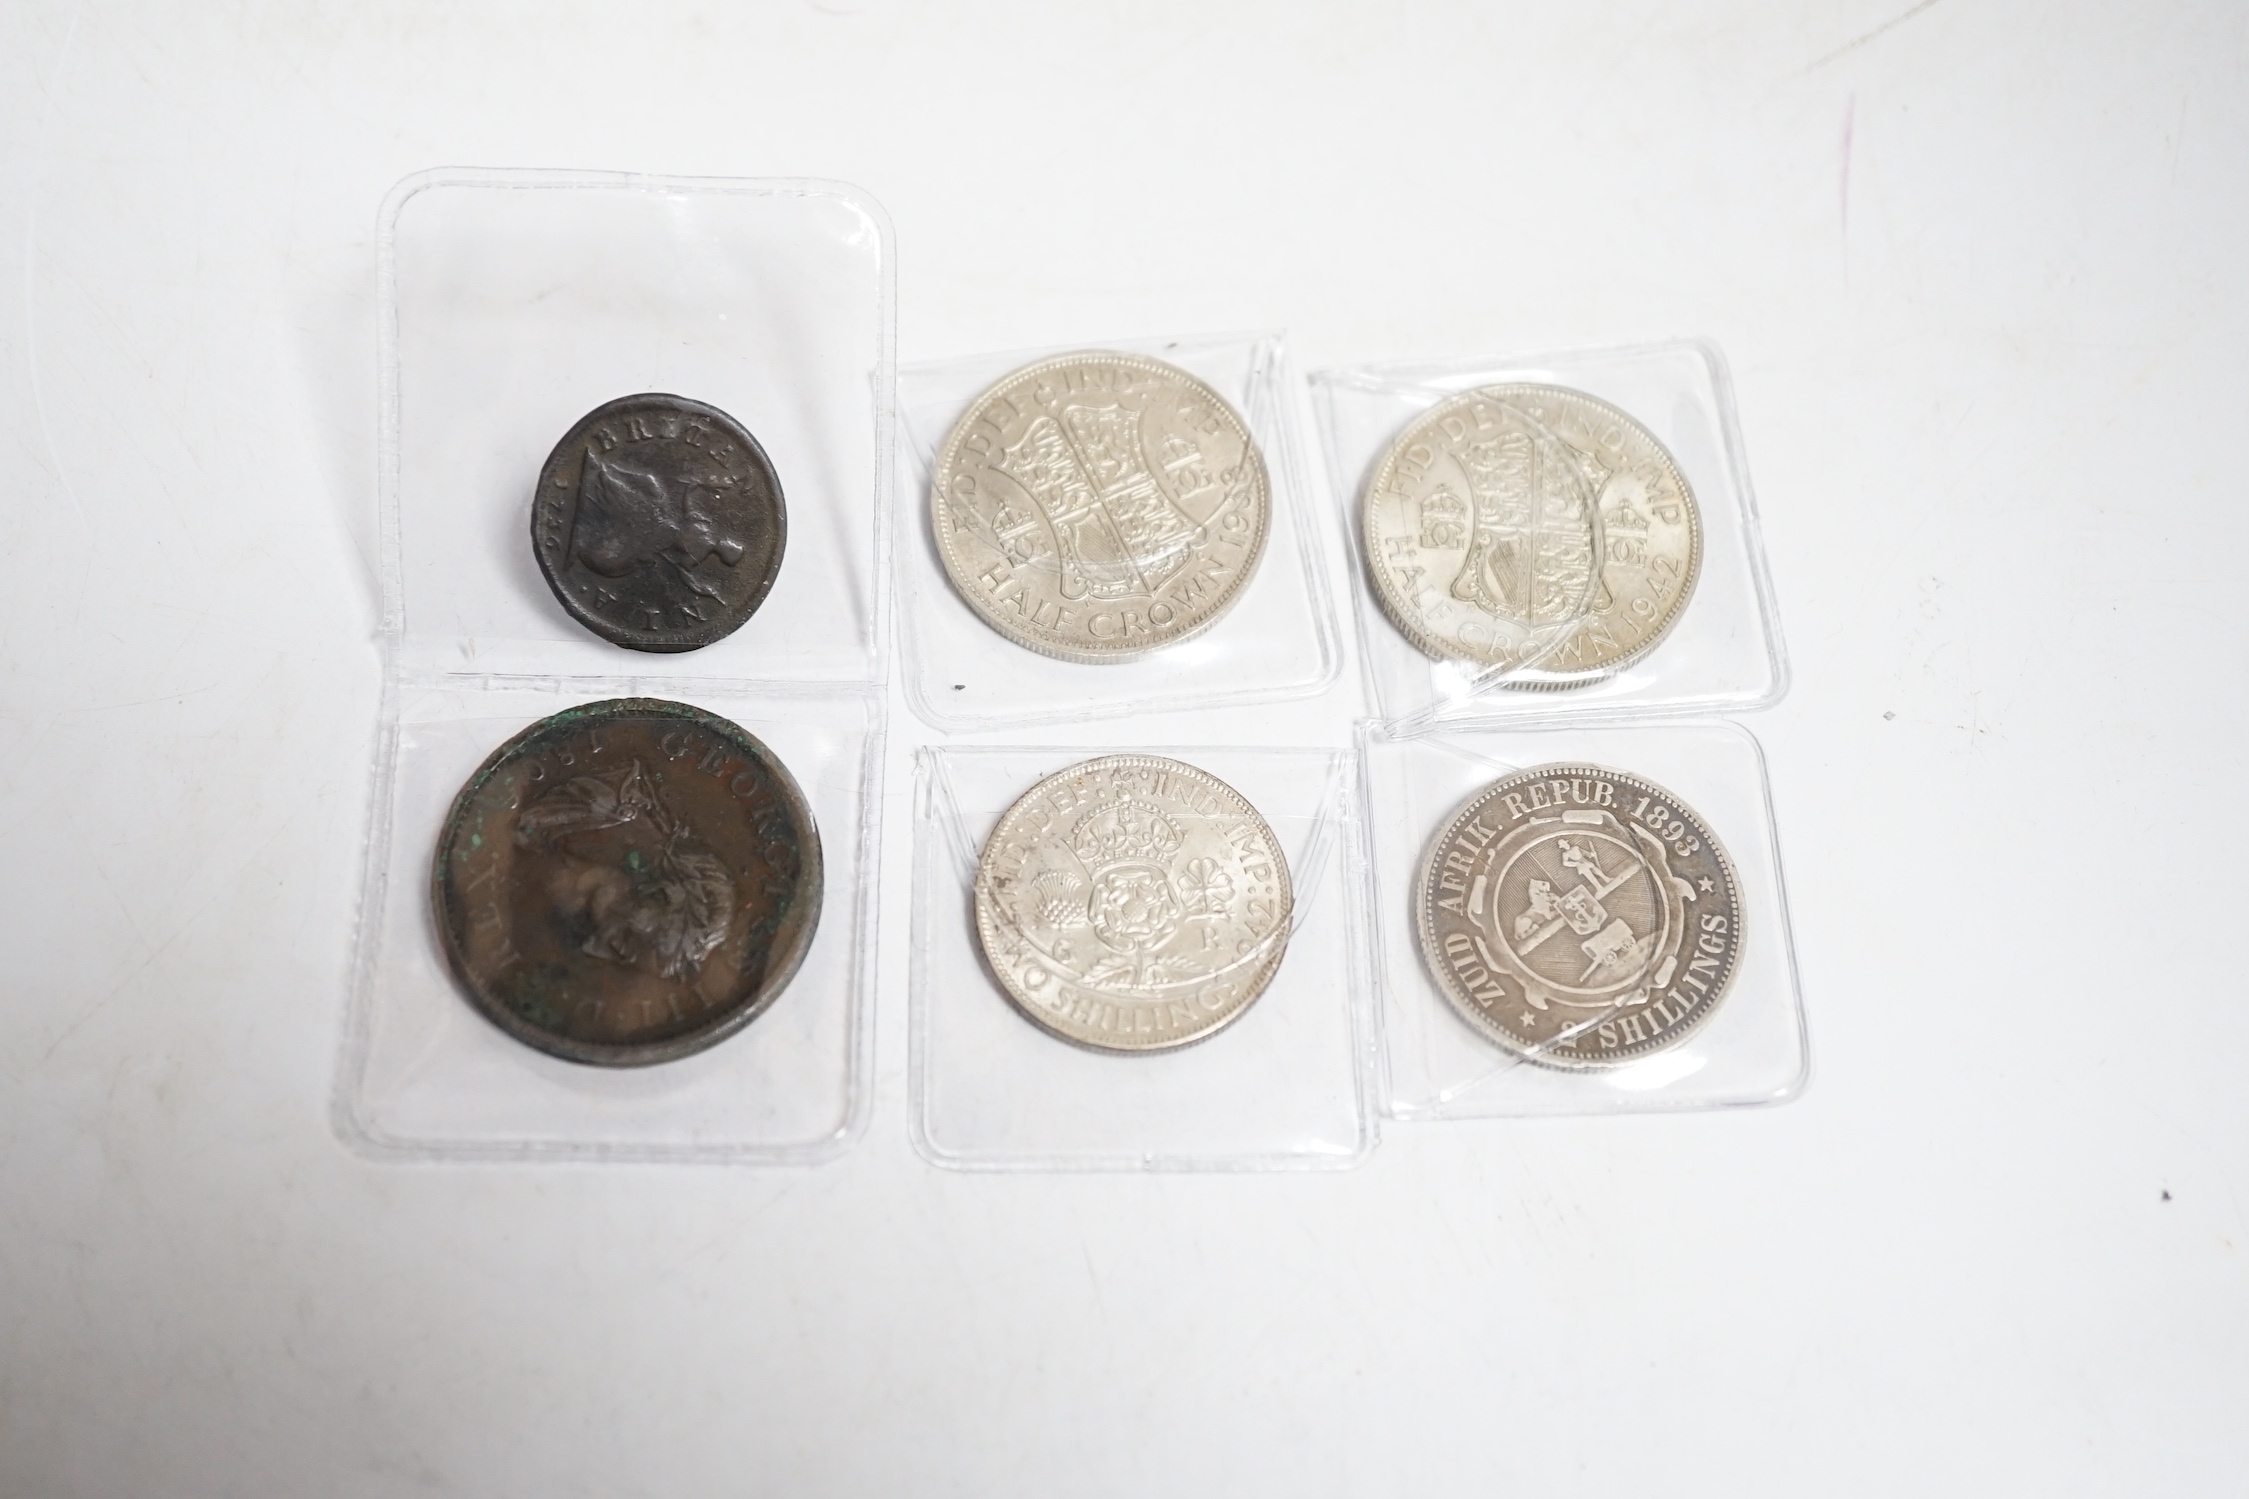 UK coins, 1938 and 1942 half crowns, 1736 farthing, 1806 penny, 1942 and a ZuidAfrica 2 shillings